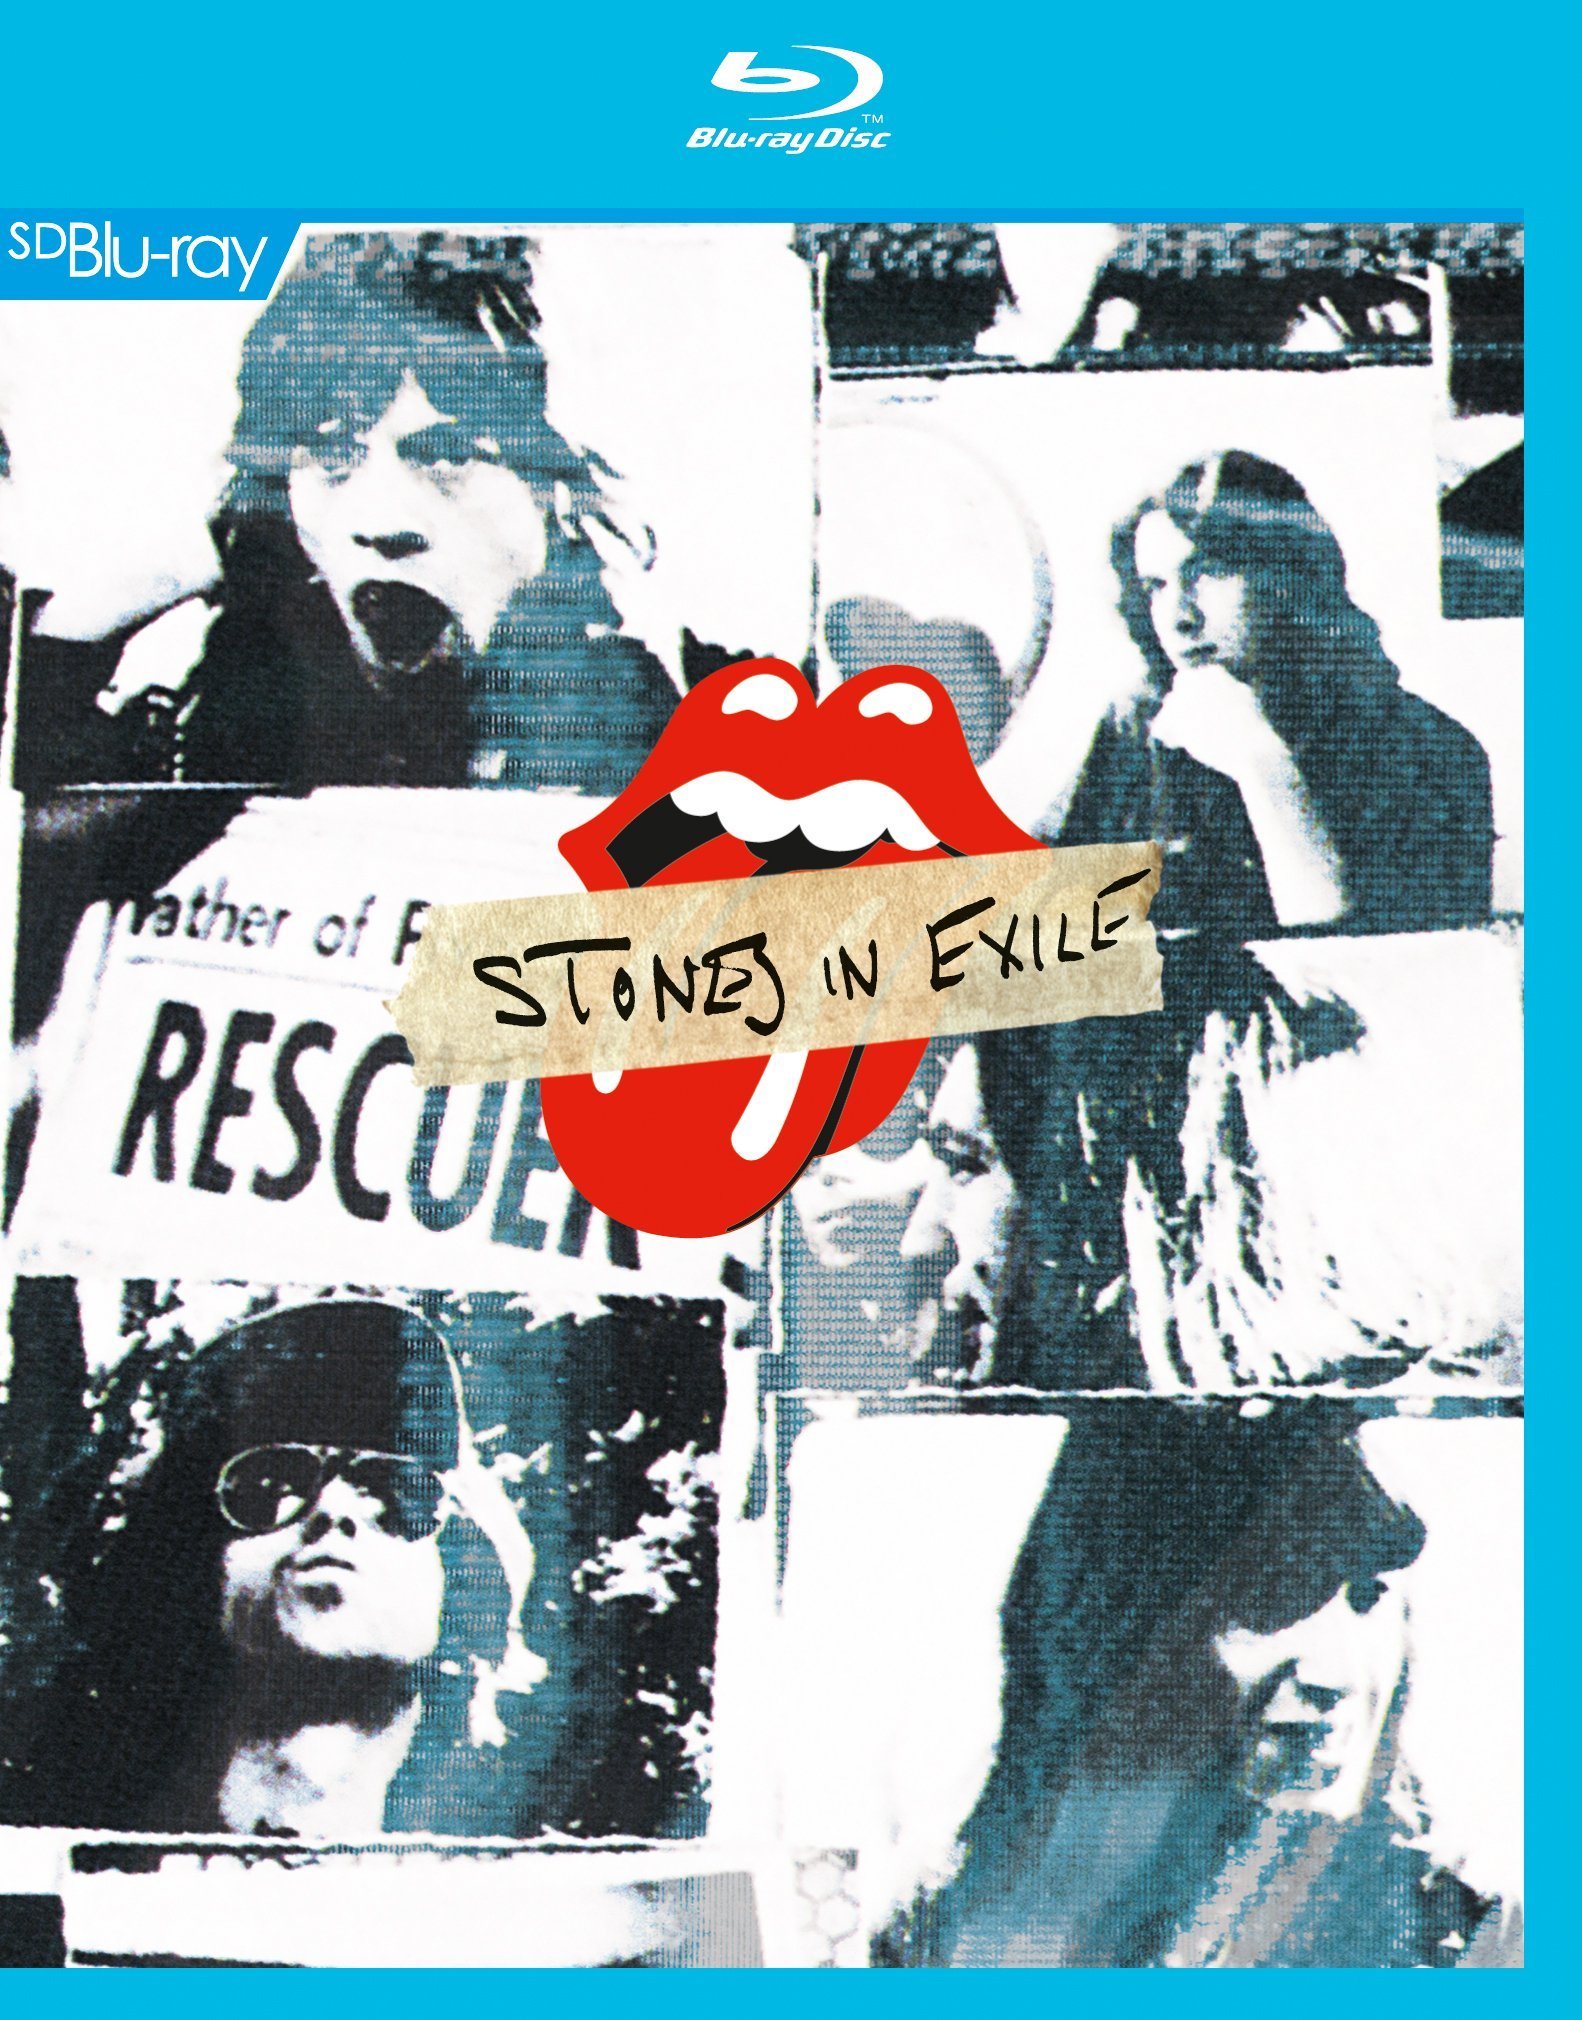 The.Rolling.Stones.Stones.in.Exile.2010.1080p.BluRay.x264-LOUNGE 4.37GB-1.jpg